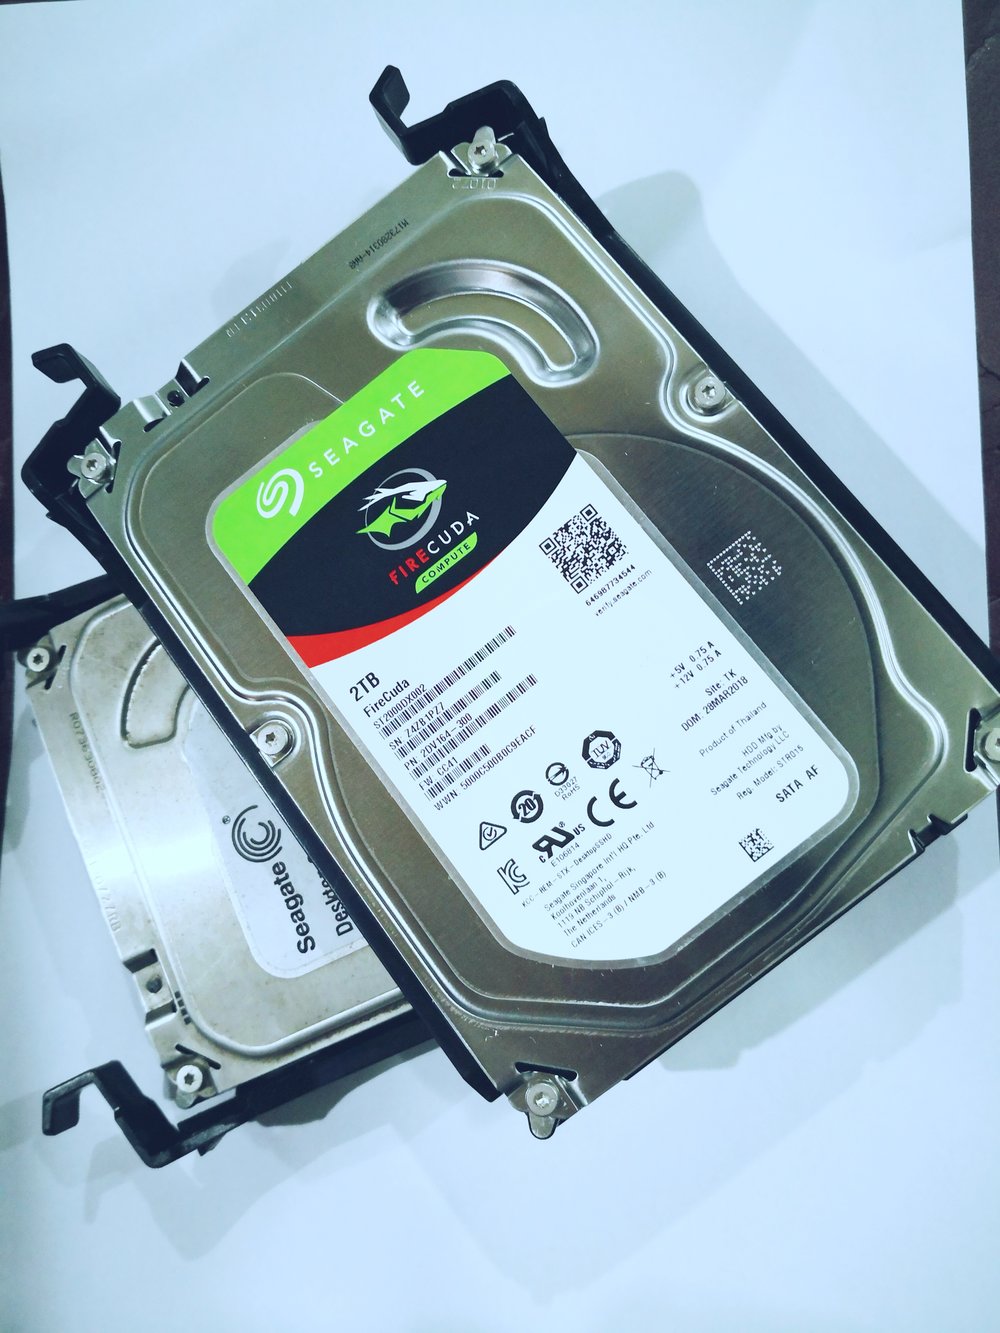 HD Review: This Drive is Fire...Cuda — Too Much Gaming | Video Games Reviews, News, & Guides